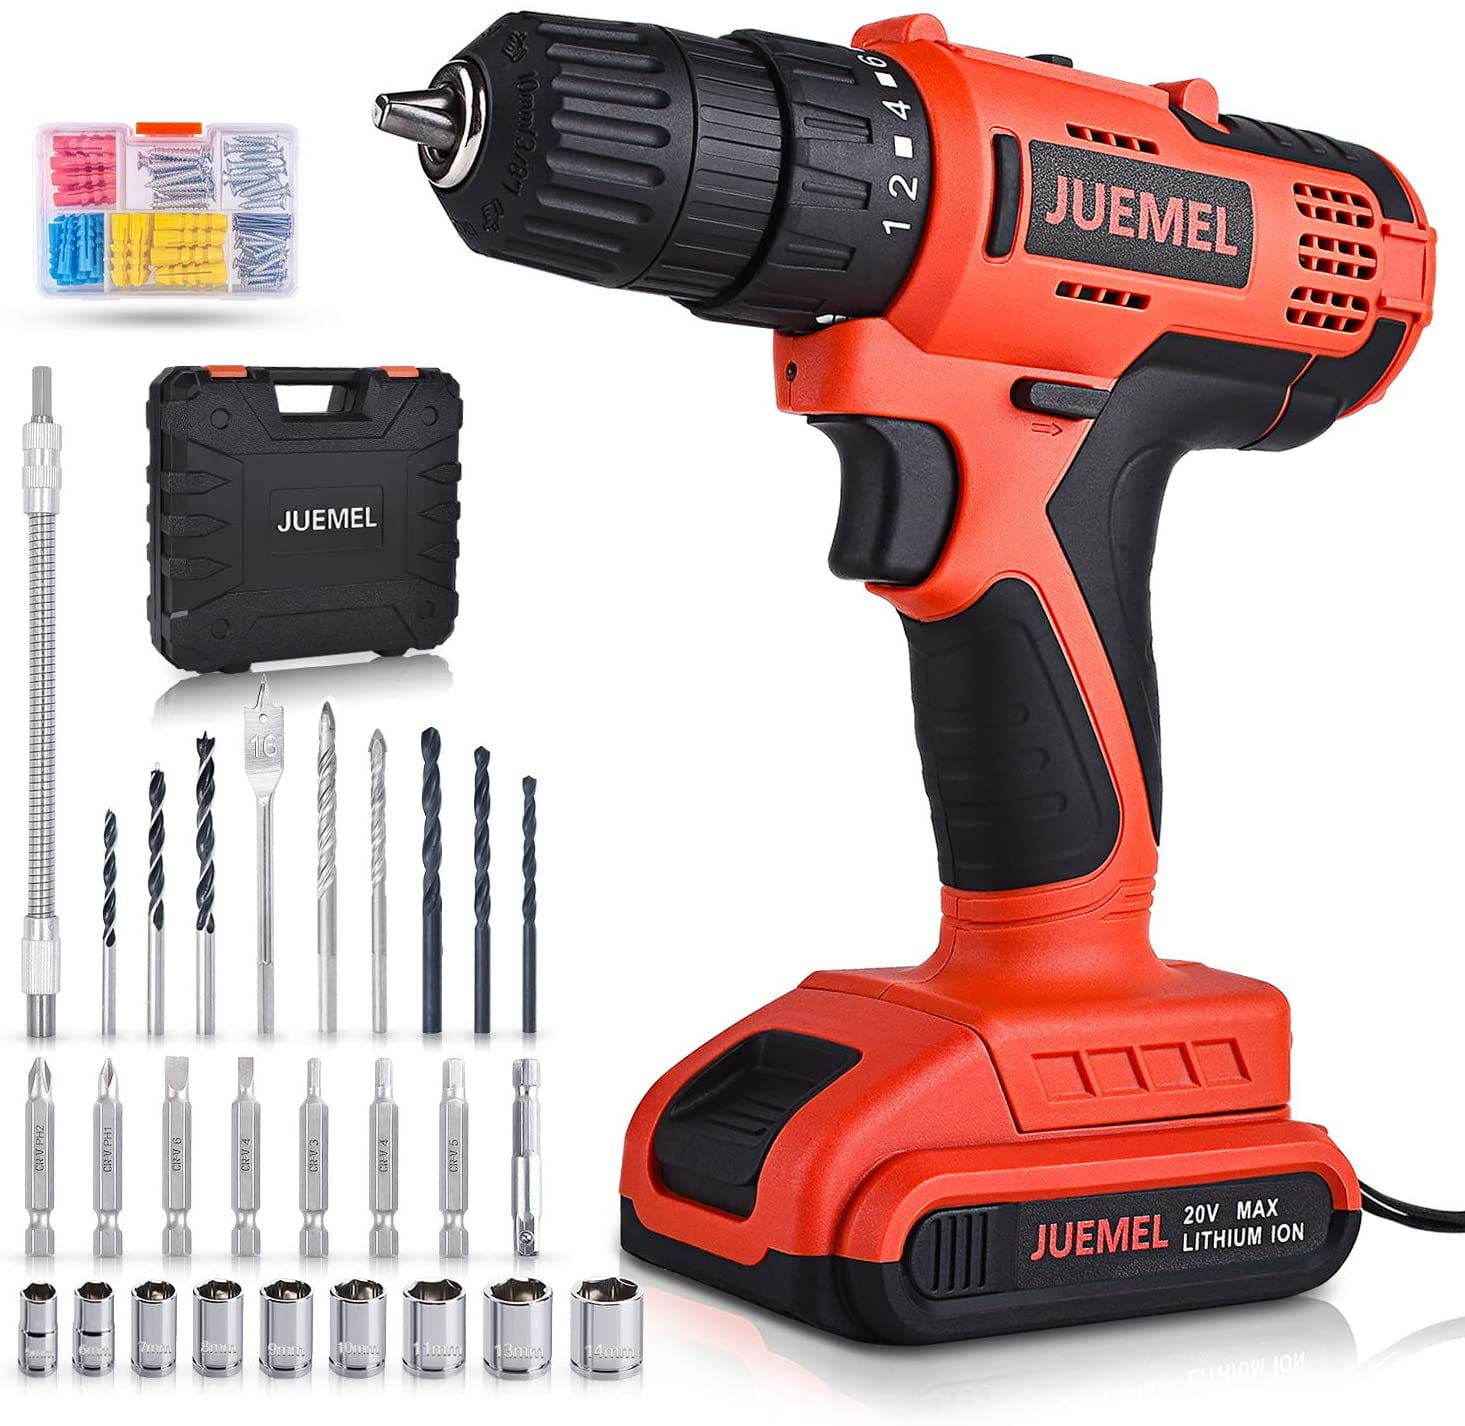 20V Max Brushed Powerful Cordless Drill Driver Tool Li-Ion battery 3/8inch Chuck 